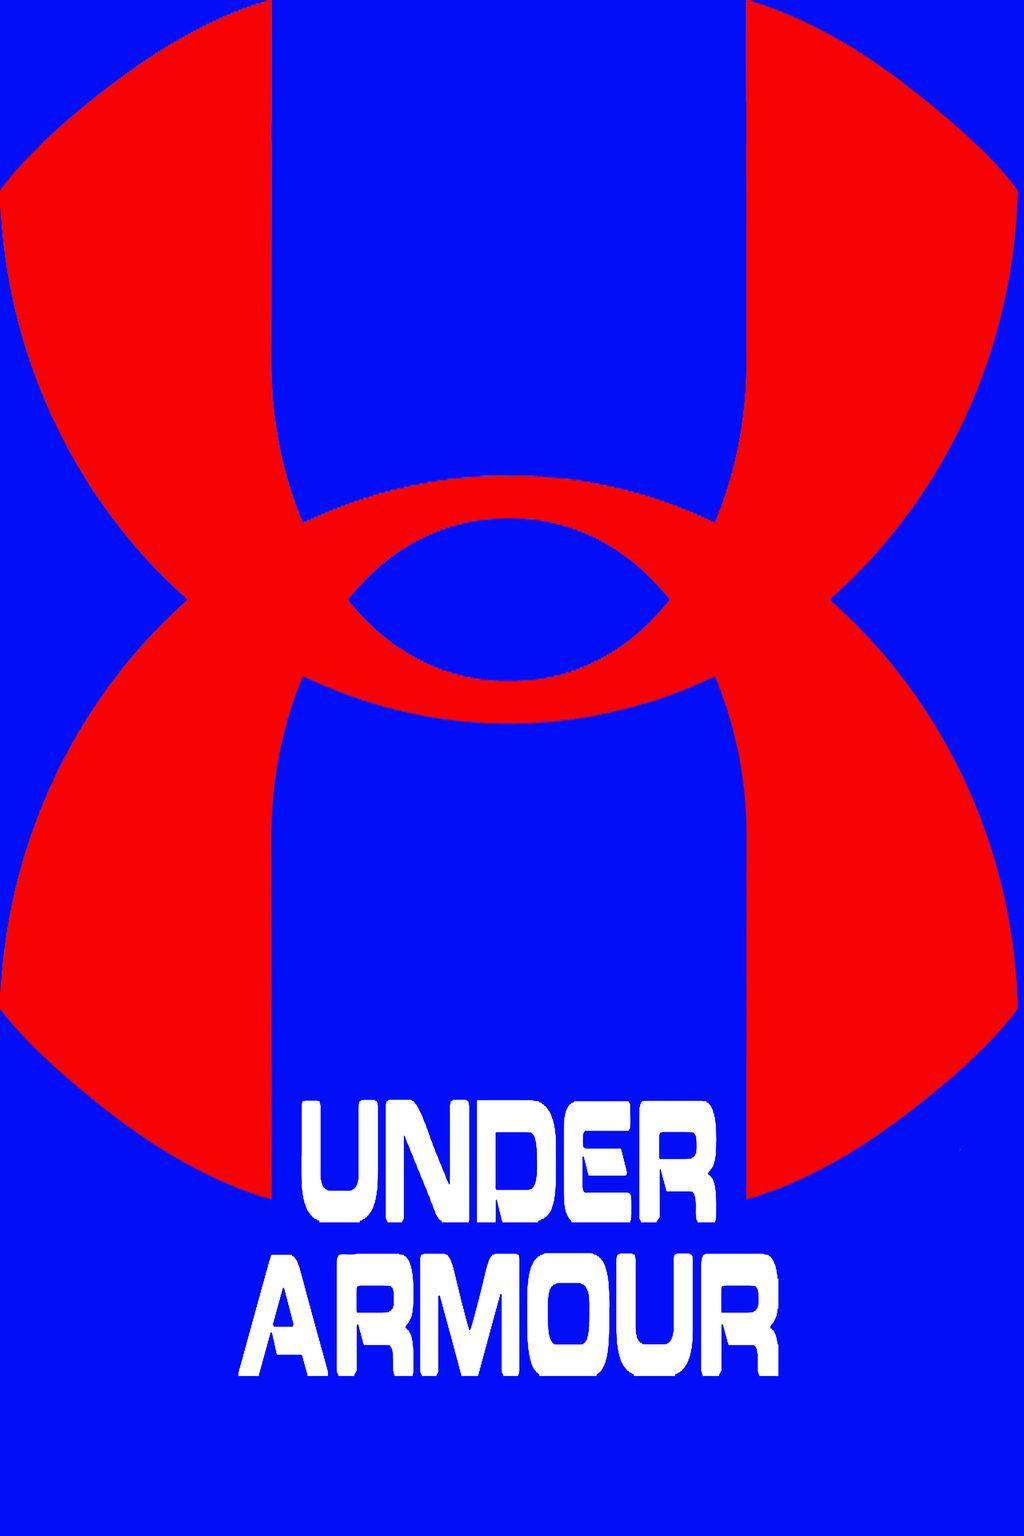 Cool Red and Blue Under Armour Logo - Under armour Logos